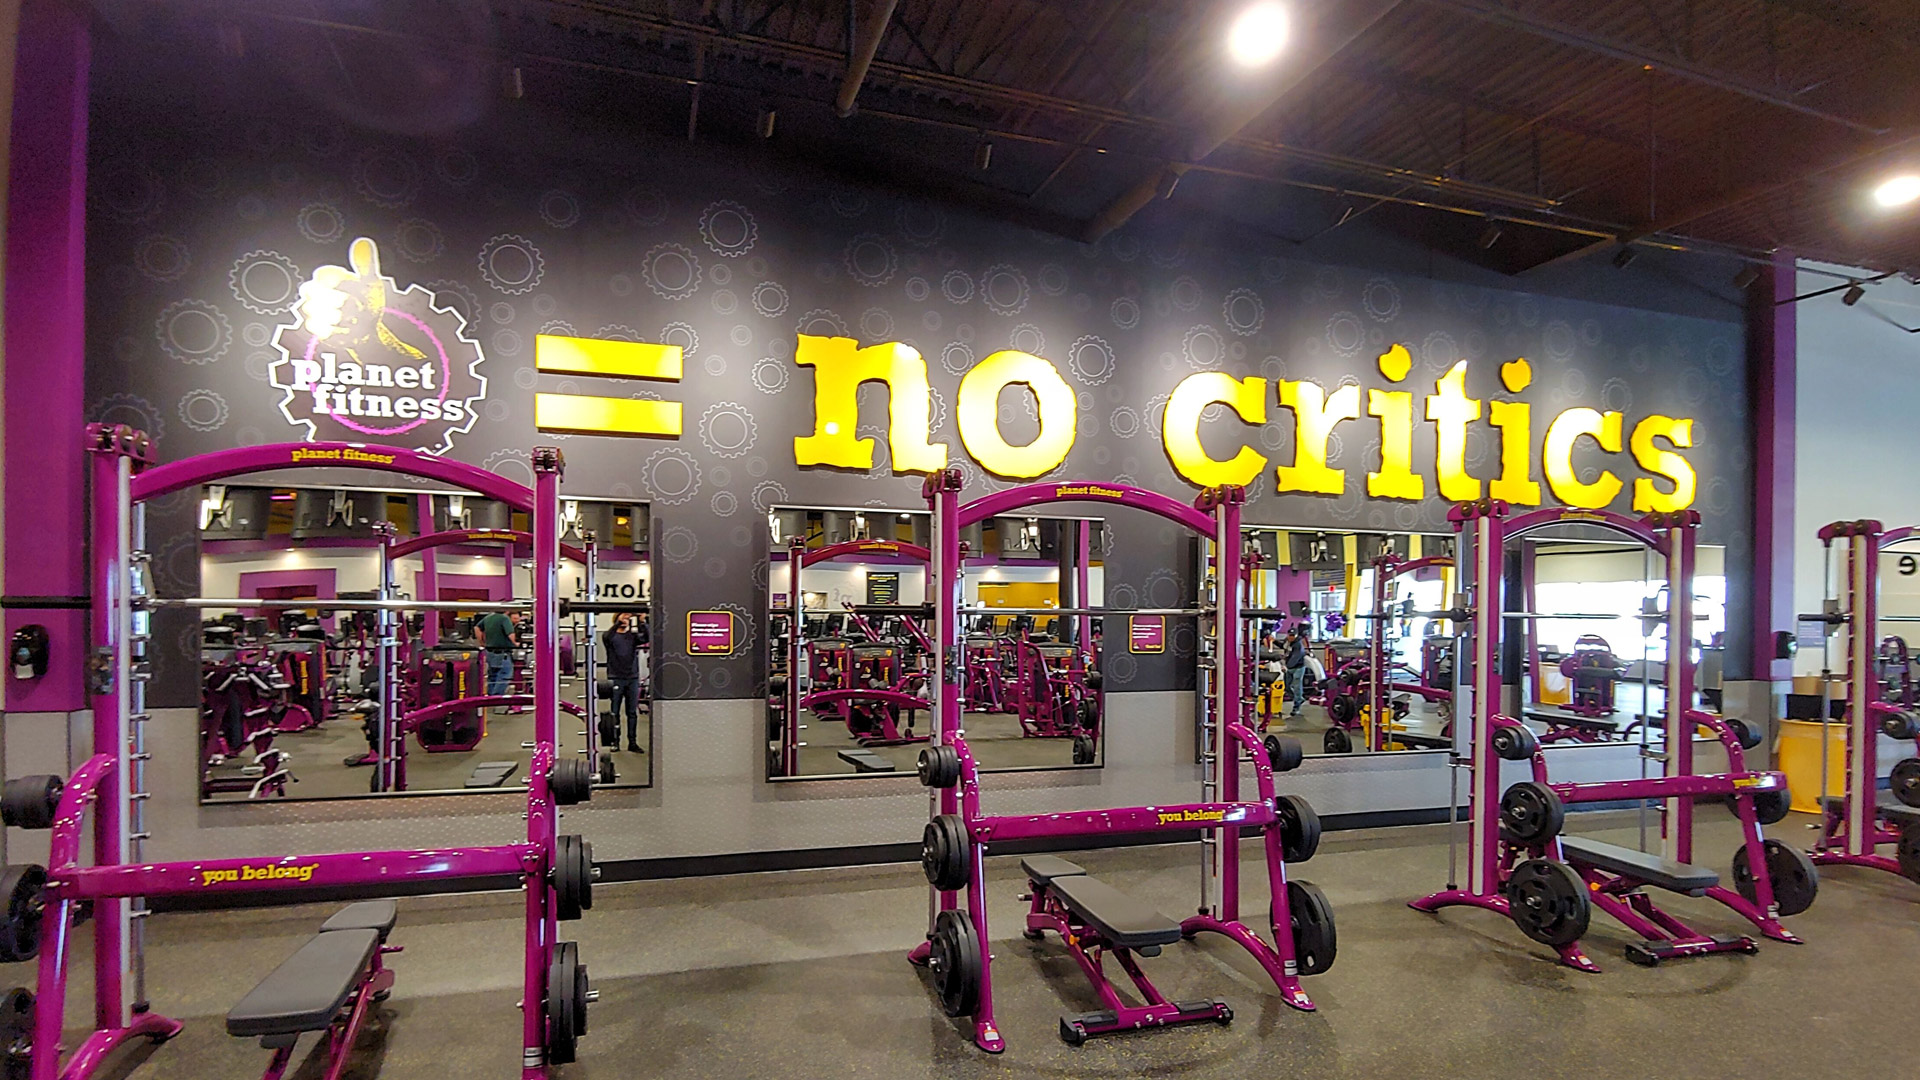  Planet Fitness Just Gym South Africa for Fat Body